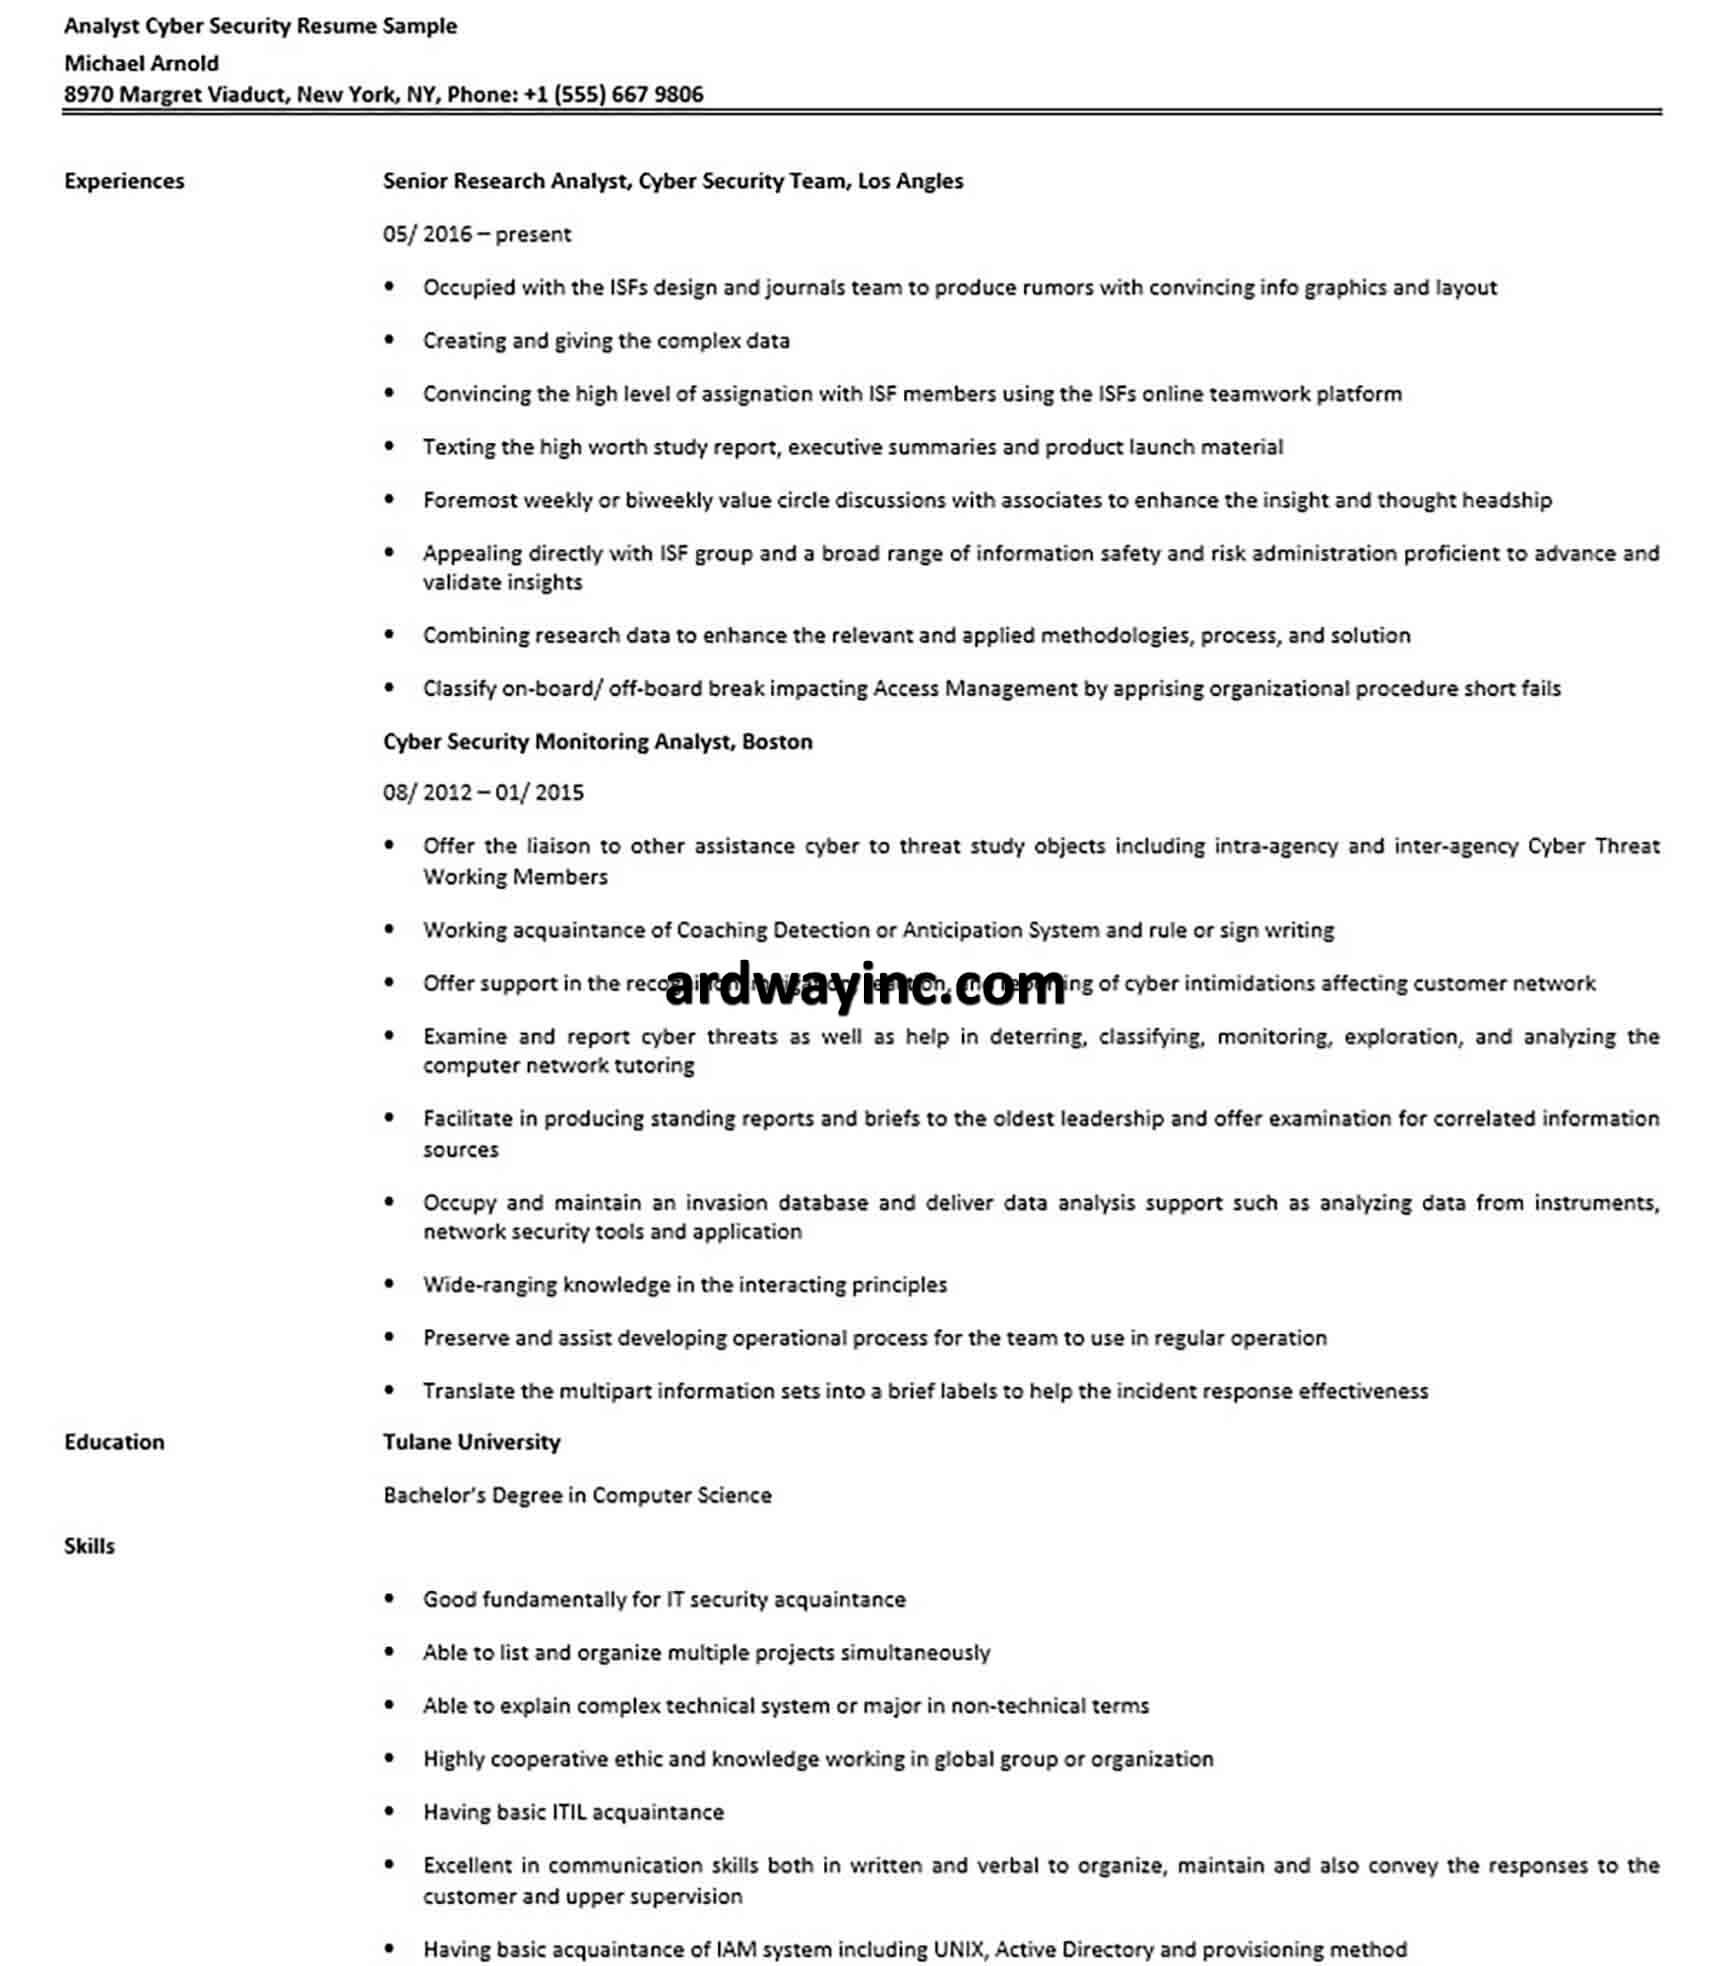 Analyst Cyber Security Resume Sample